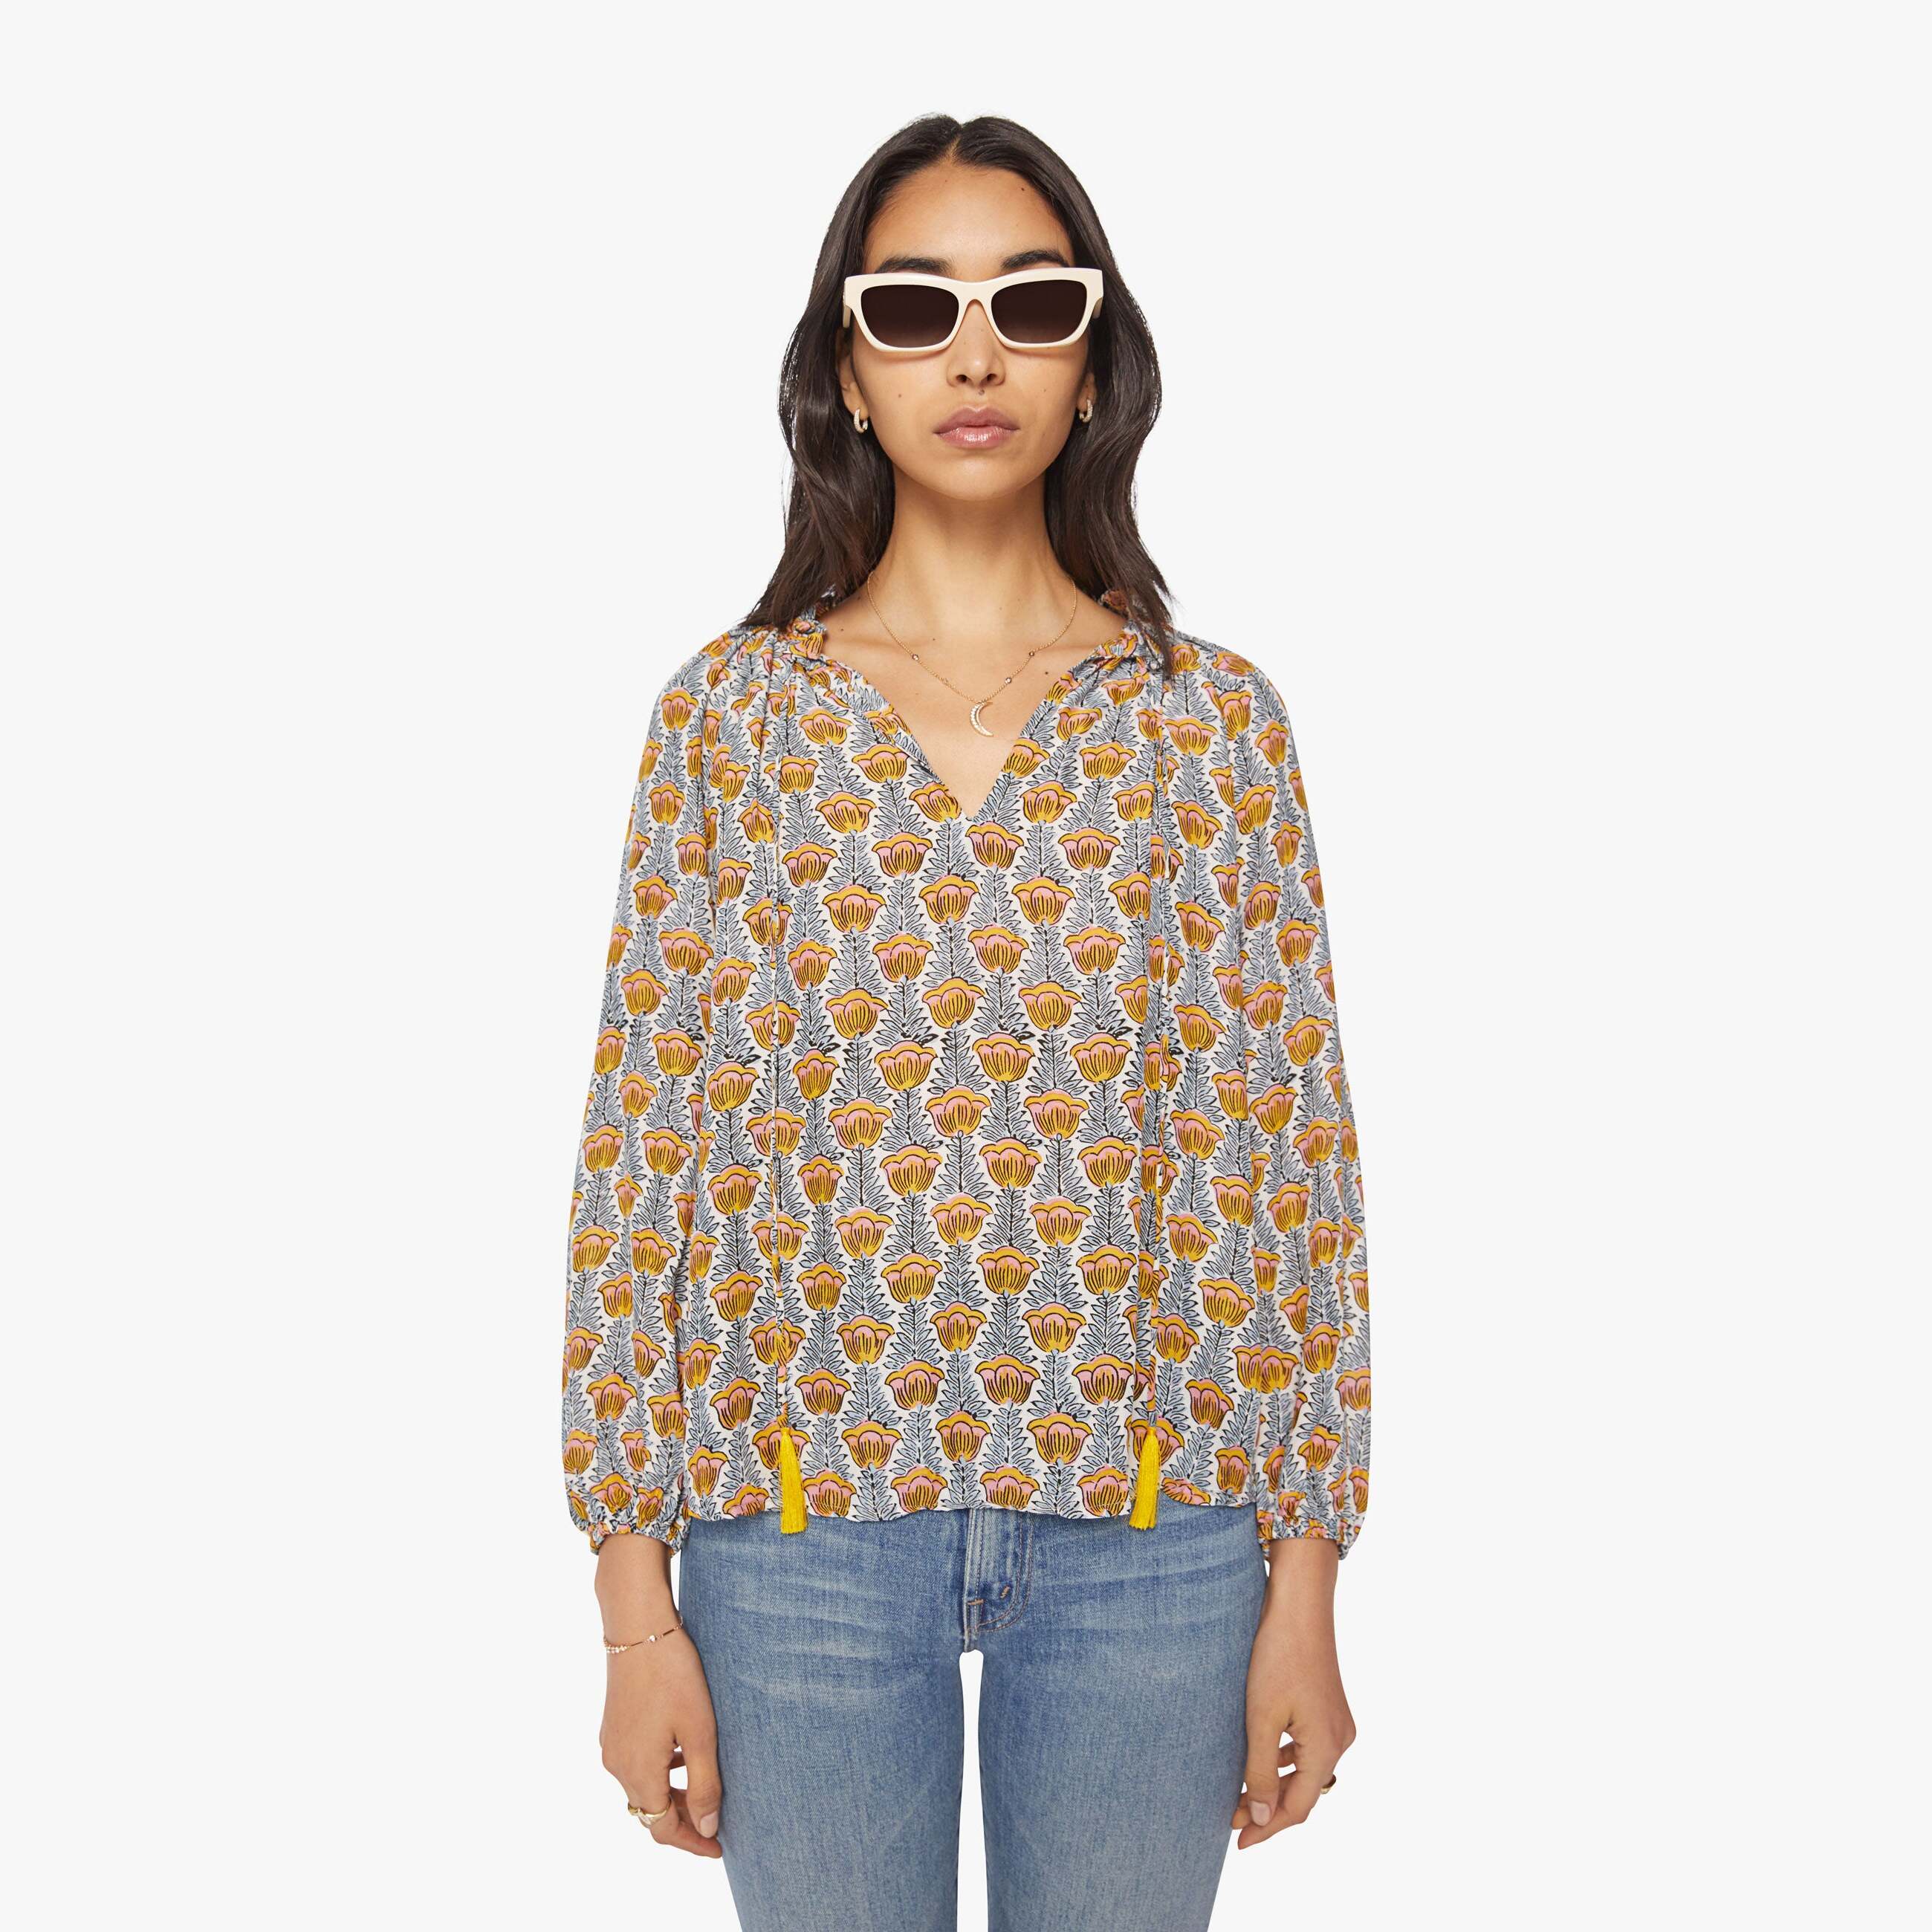 Natalie Martin Penny Blouse Tulip French Shirt In Blue